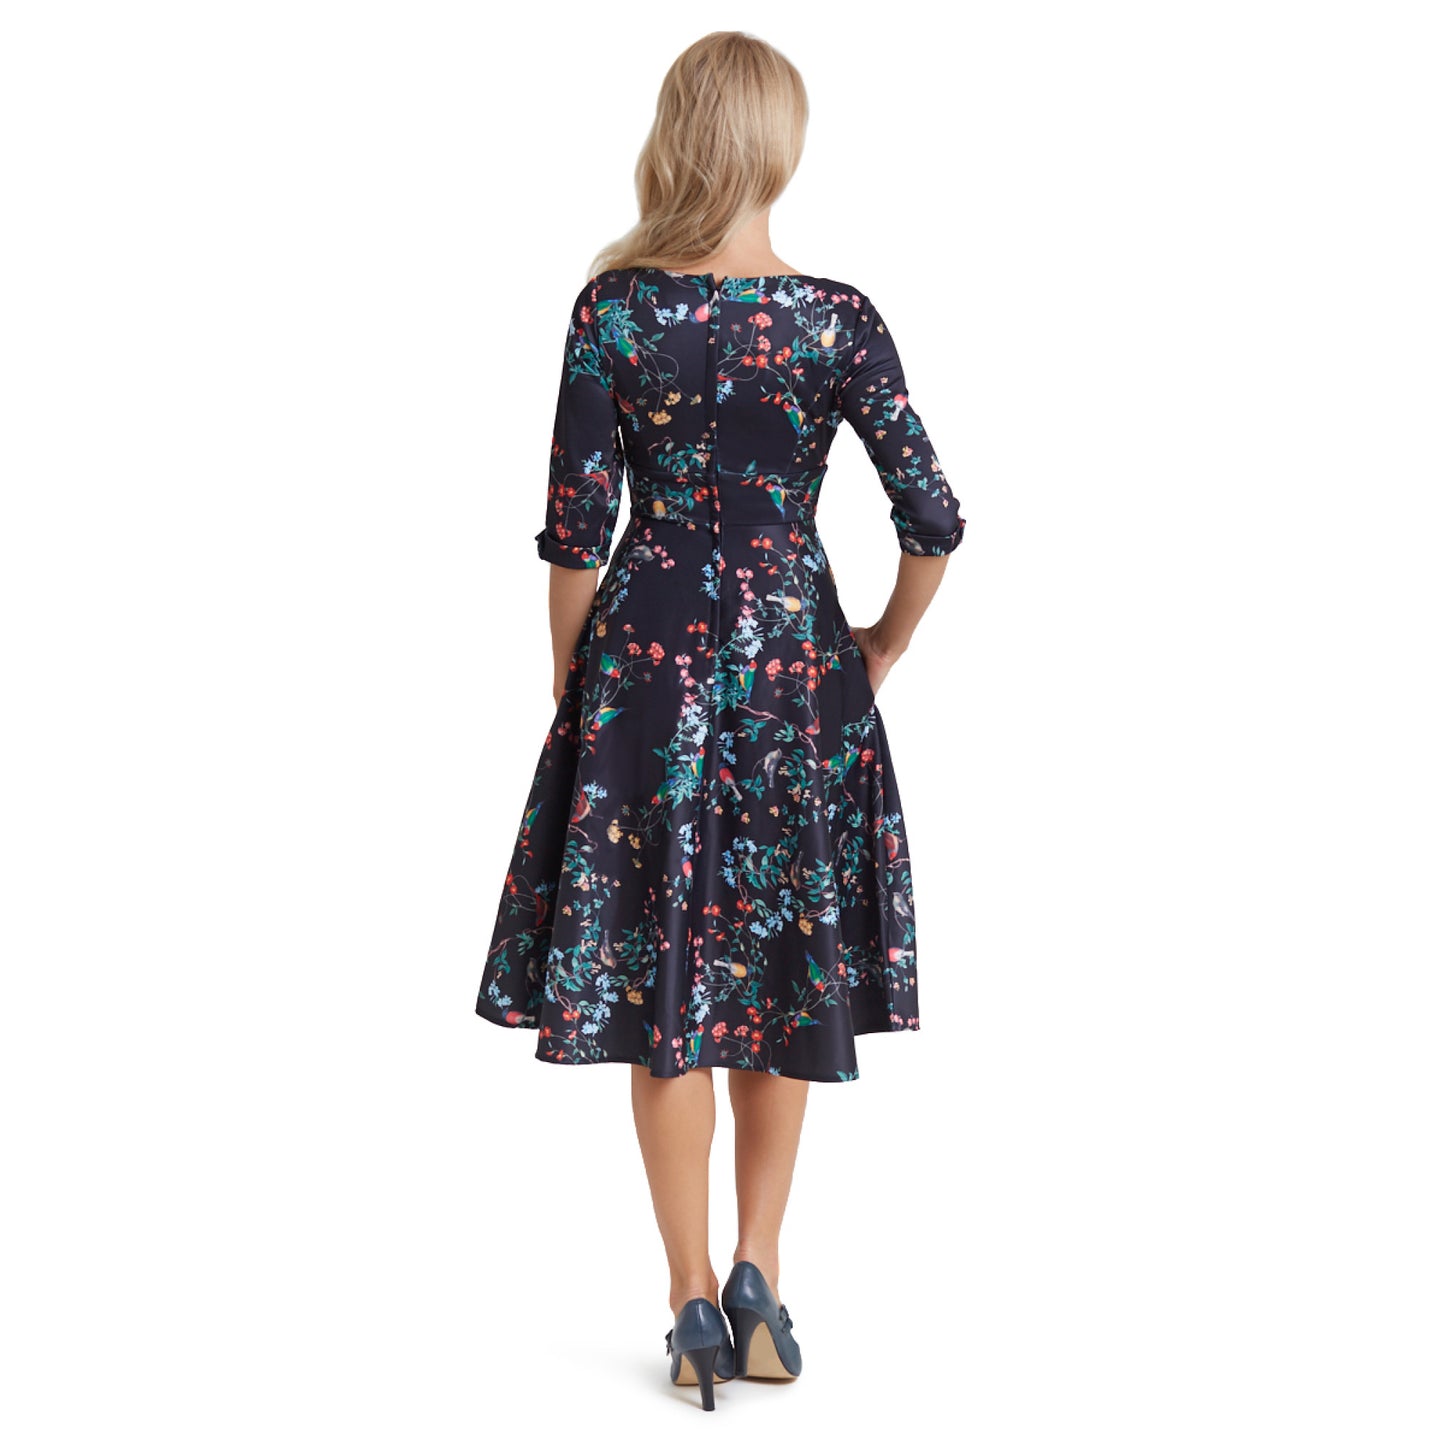 Scarlette Floral Bird Print Midi Dress by Dolly and Dotty